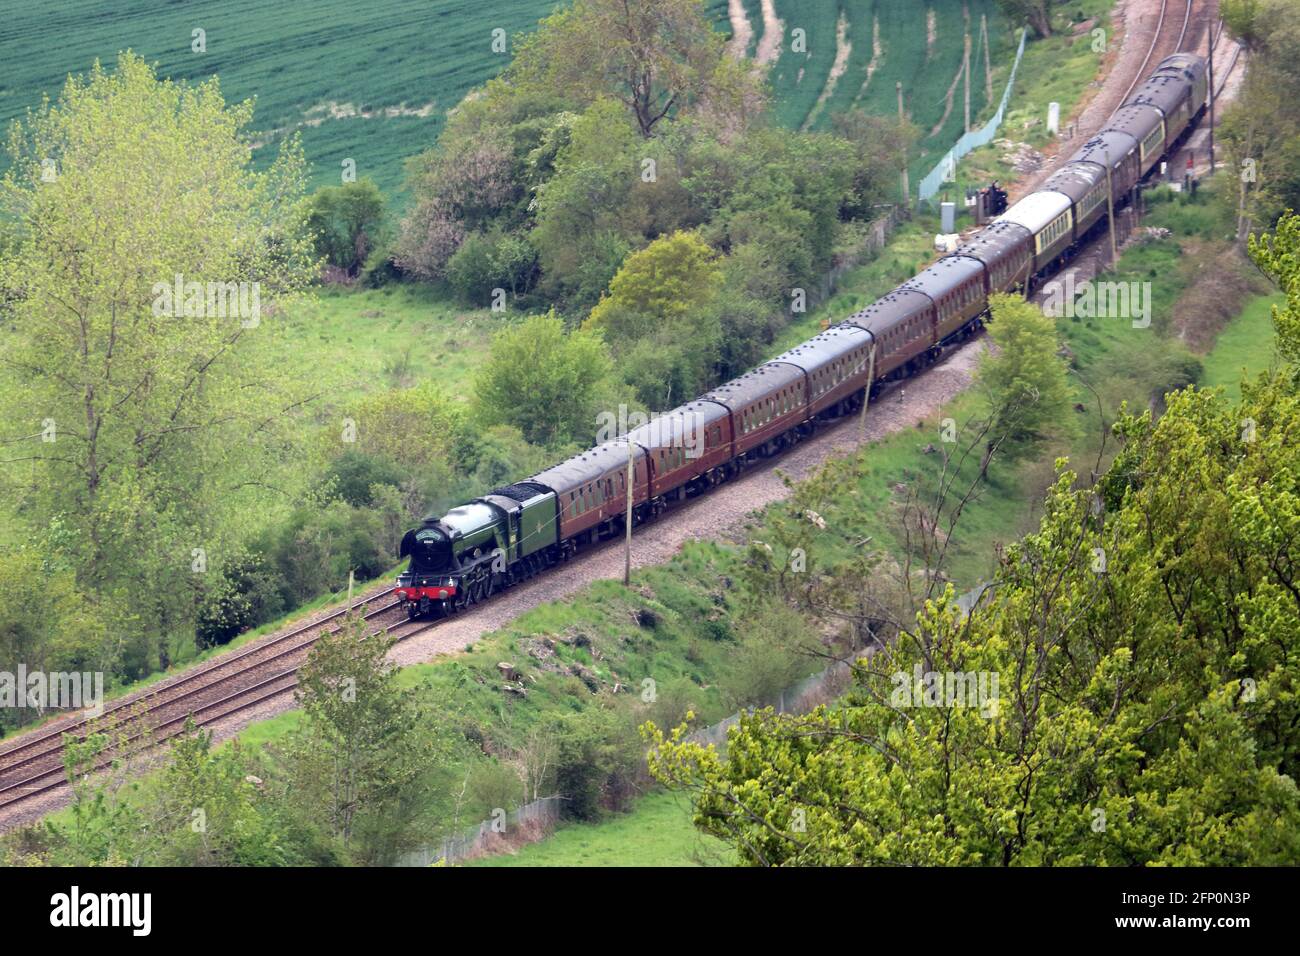 Dorking, Surrey, England, UK. 20th May, 2012. The Flying Scotsman locomotive steams through the leafy Surrey Hills near Dorking. The first outing of 2021 for this world famous steam train taking passengers on a round trip from London and into Surrey and back on a three hour journey on the Steam Dreams tour. Credit: Julia Gavin/Alamy Live News Stock Photo